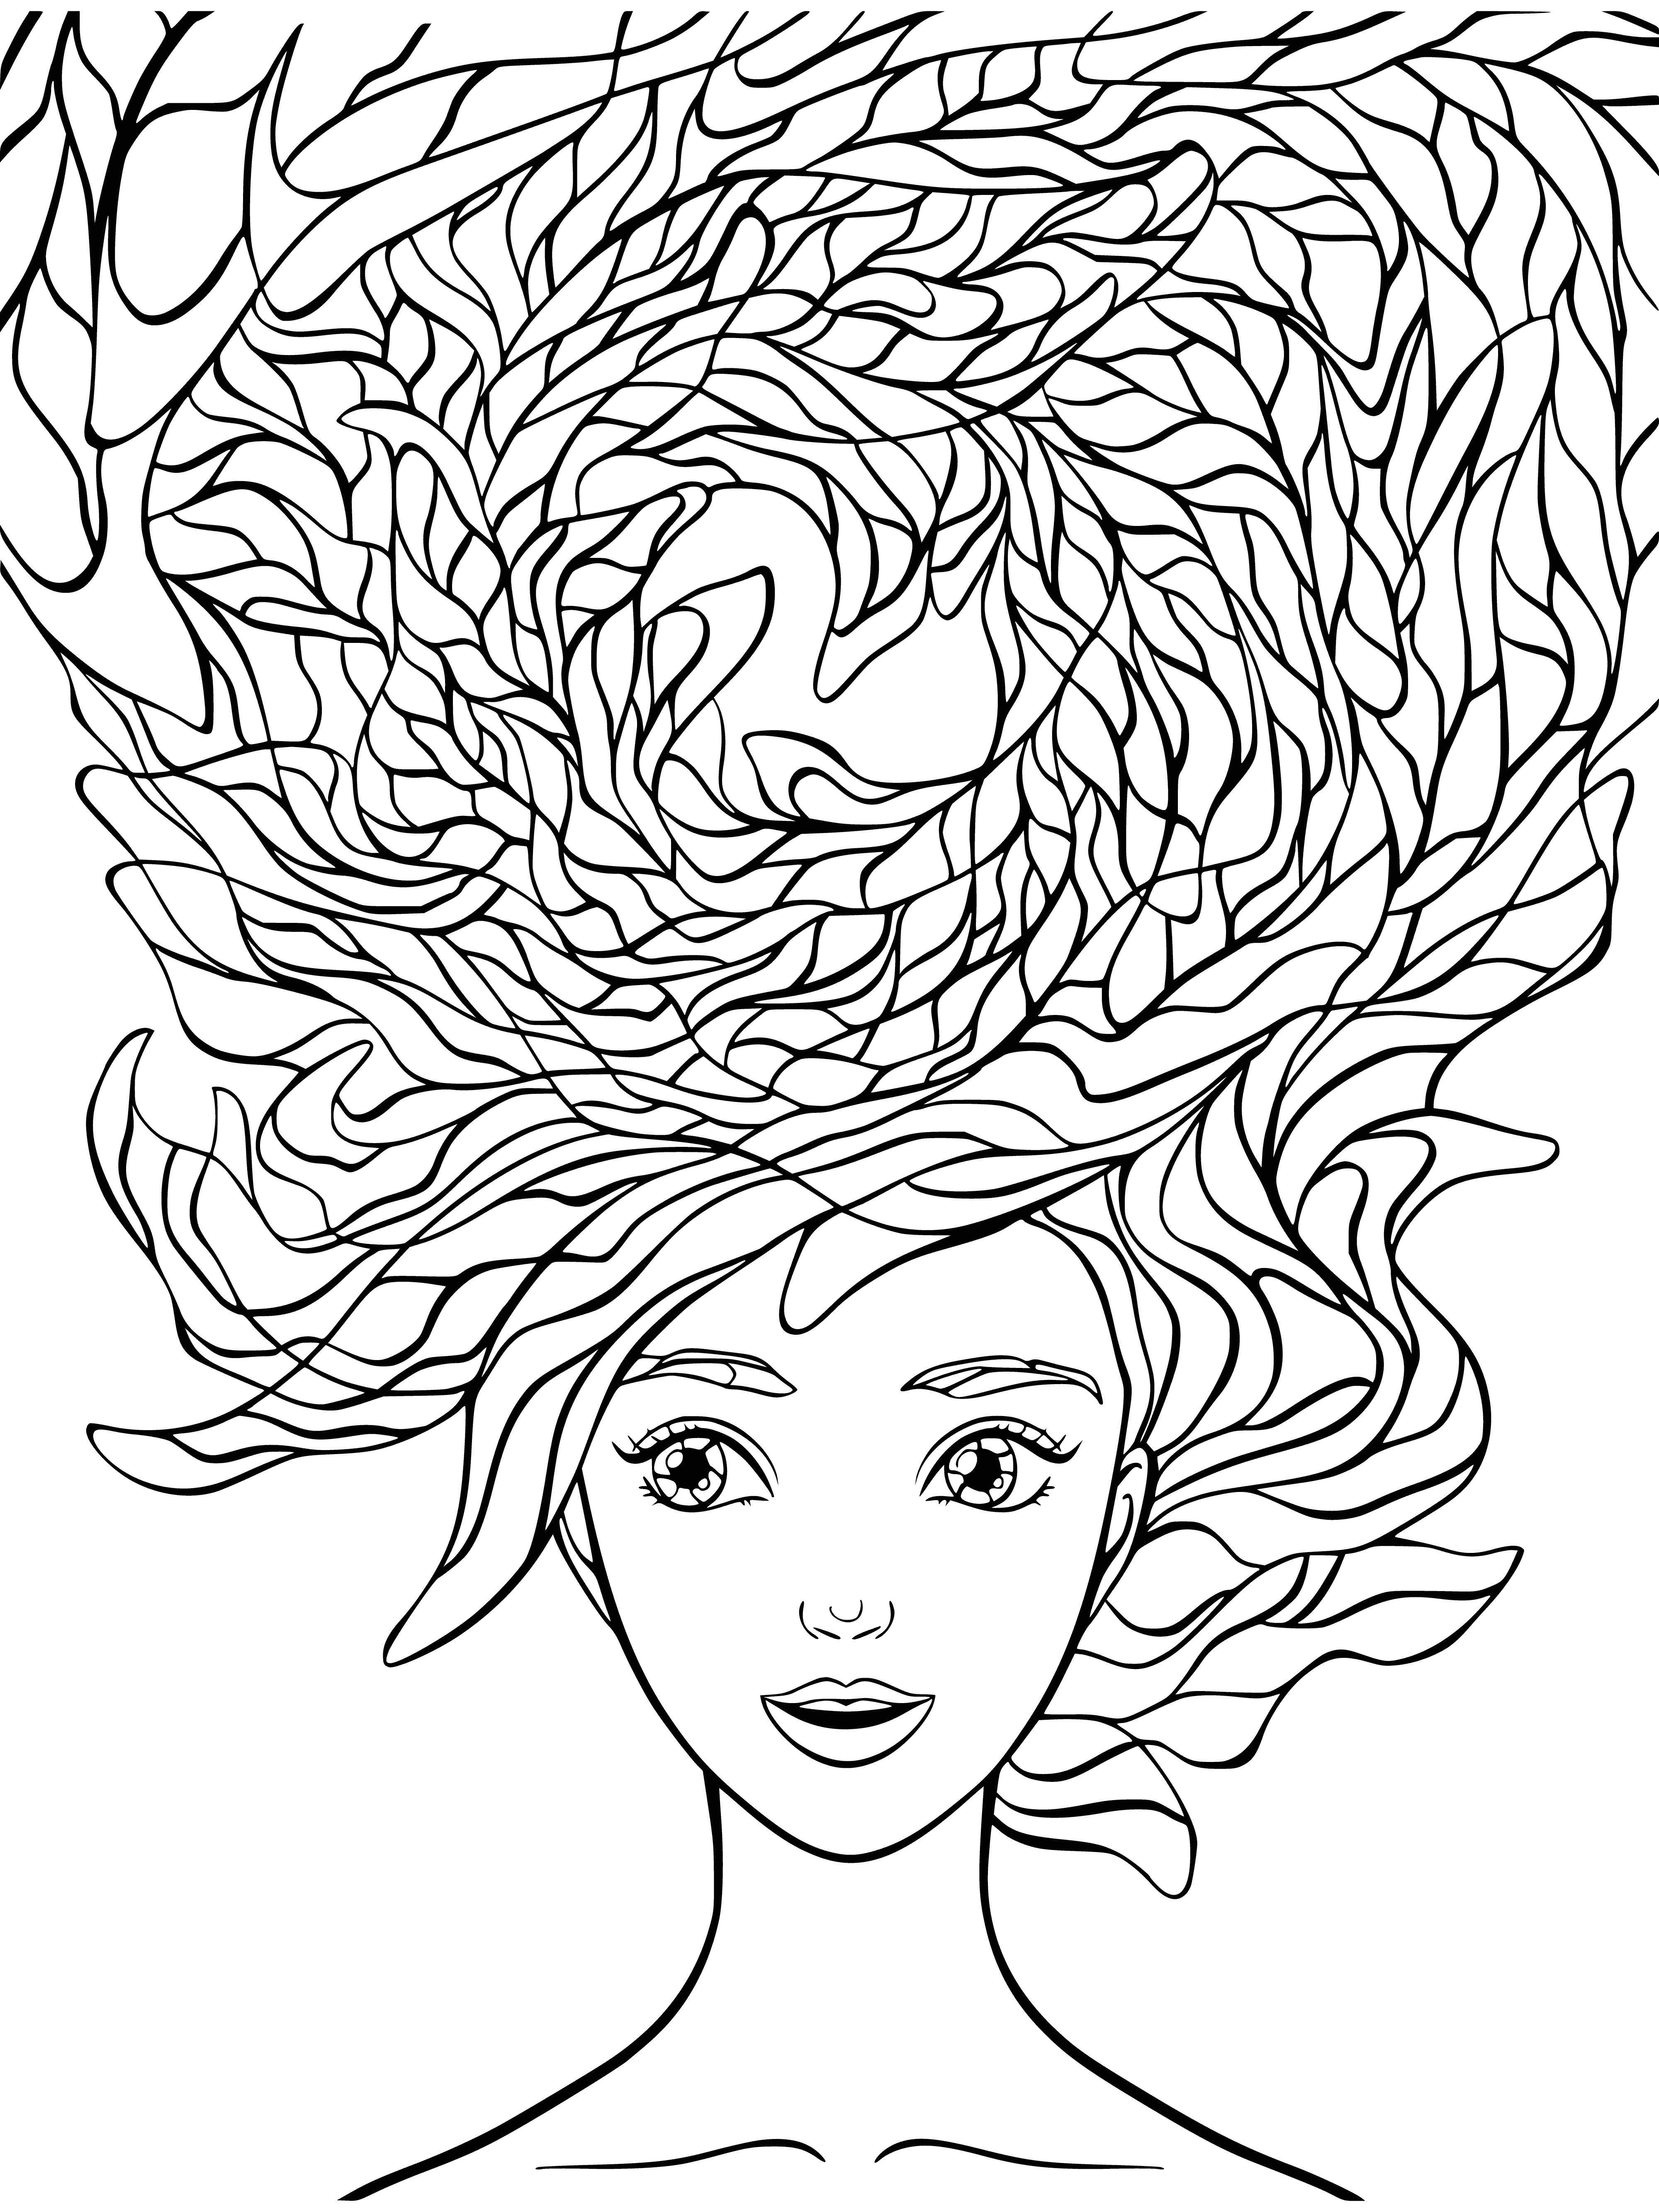 coloring page: Girl with extraordinary hair sits, her hair flowing around her, pensive expression as she colors in a coloring page.